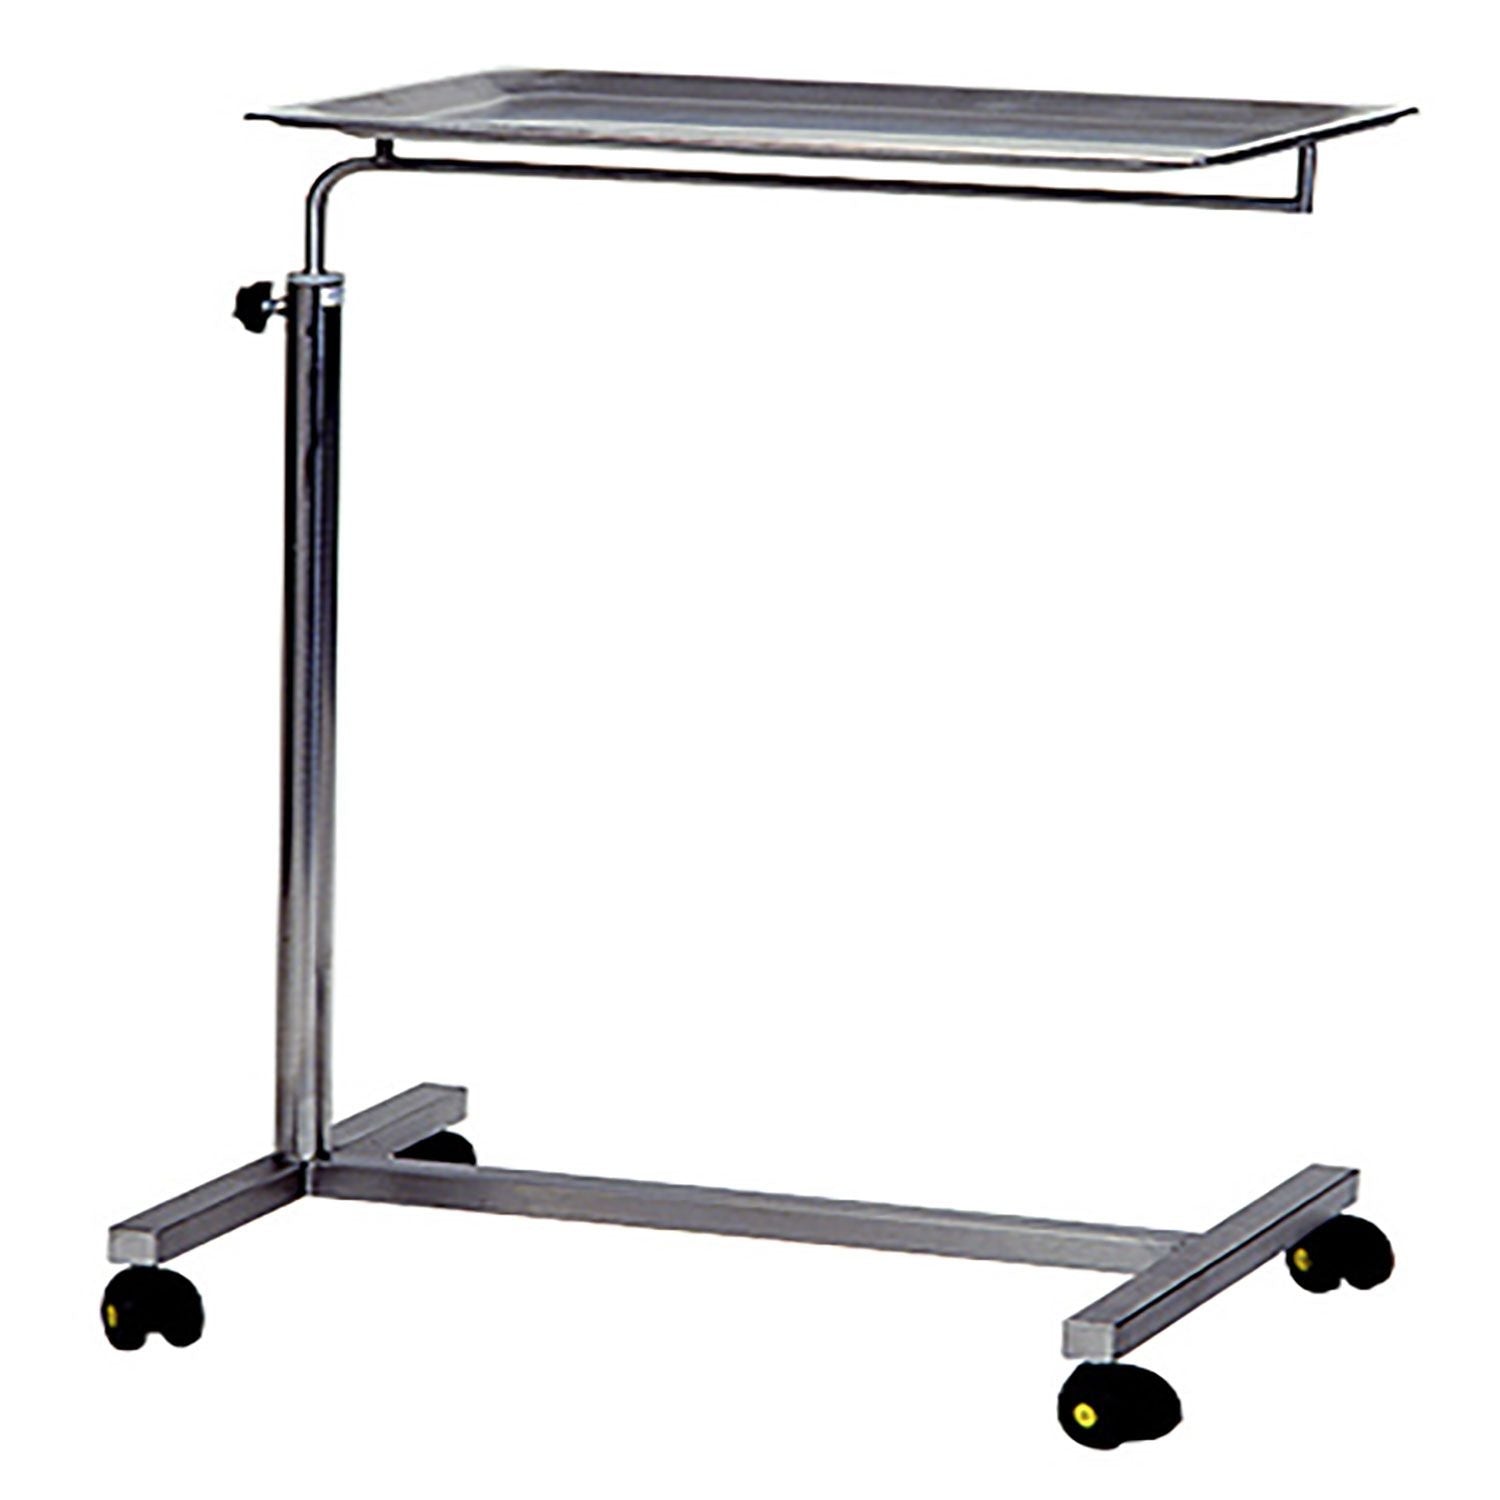 Stainless Steel Mayo Table with 4 Castors